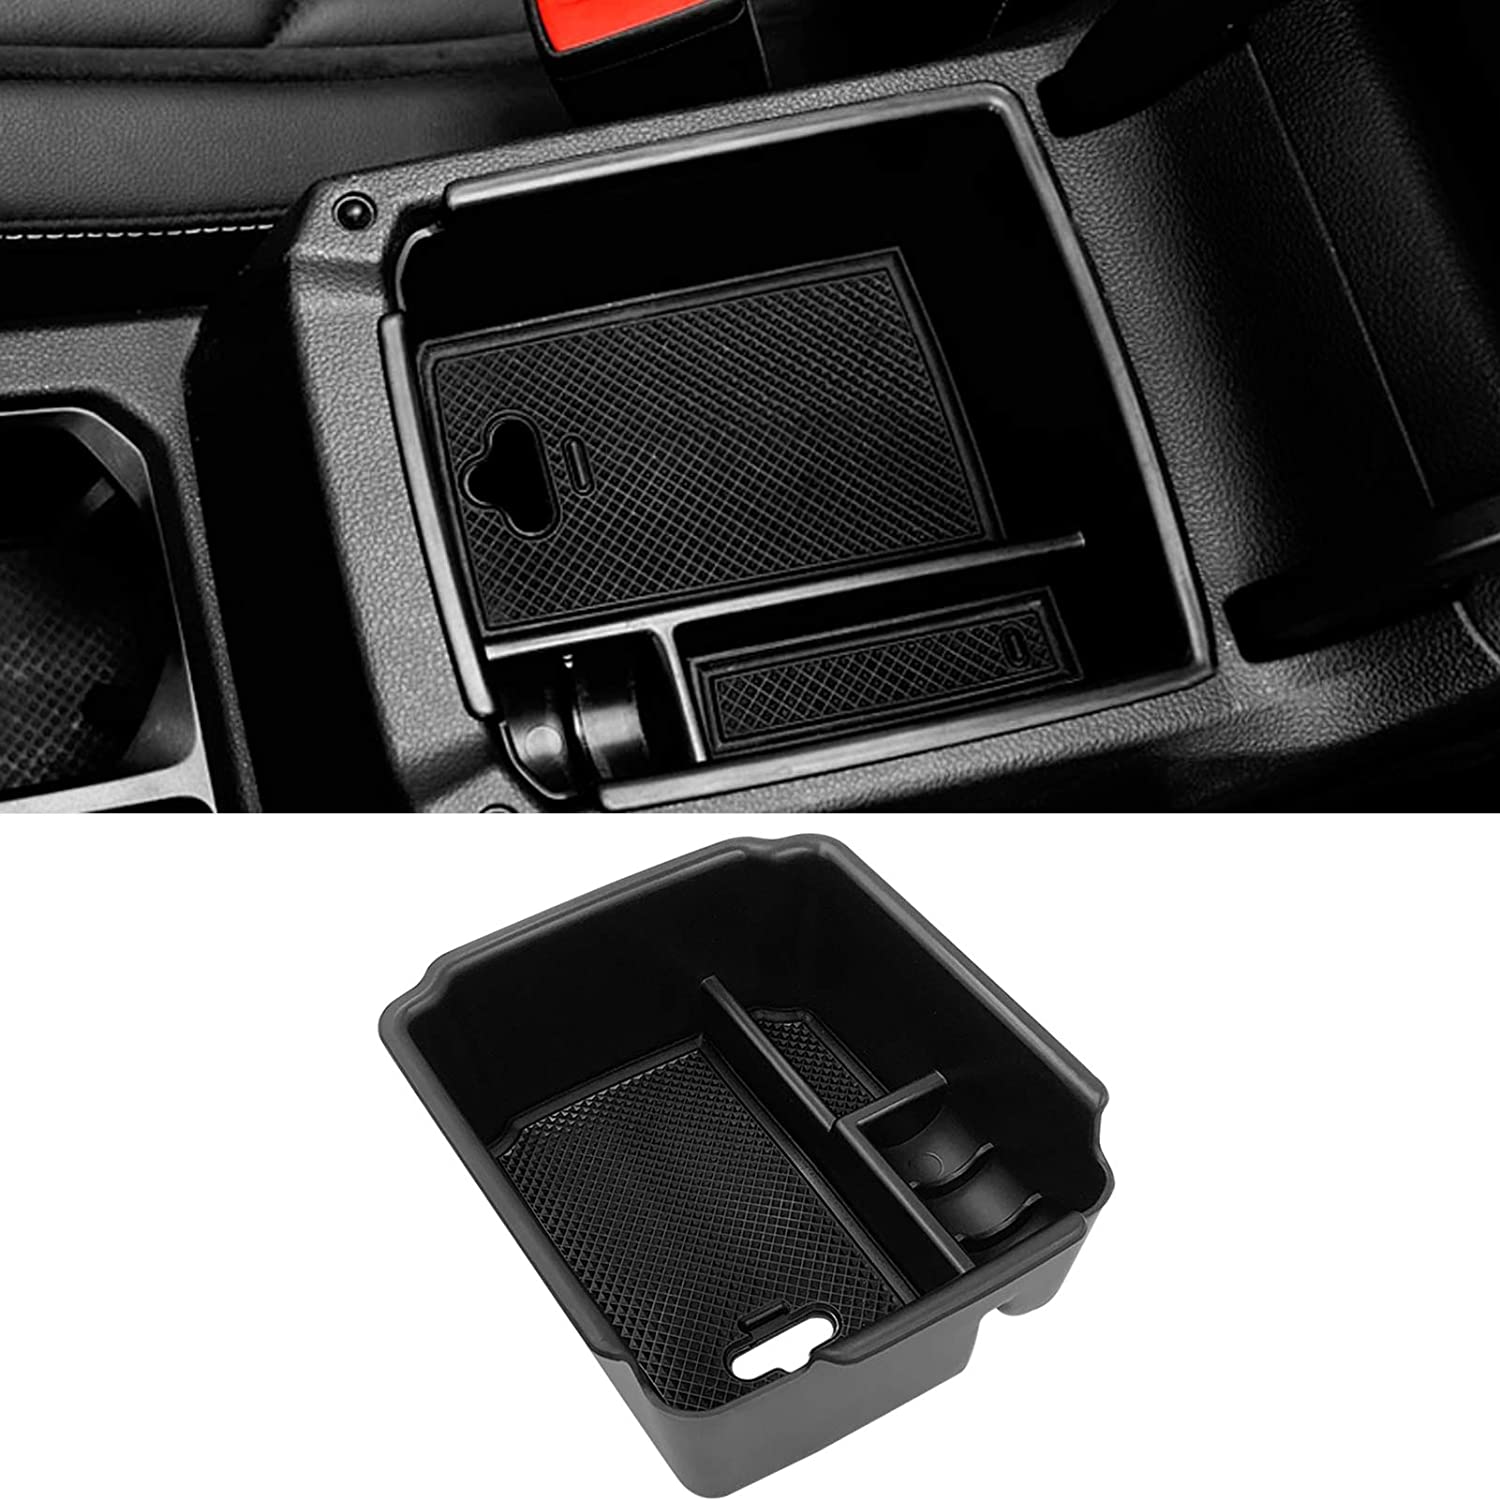 TTCR-II Centre Console Organizer Tray for Volkswagen Tiguan 2018-2021, Console  Armrest Glove Compartment Container Tray with Coin Storage Holder